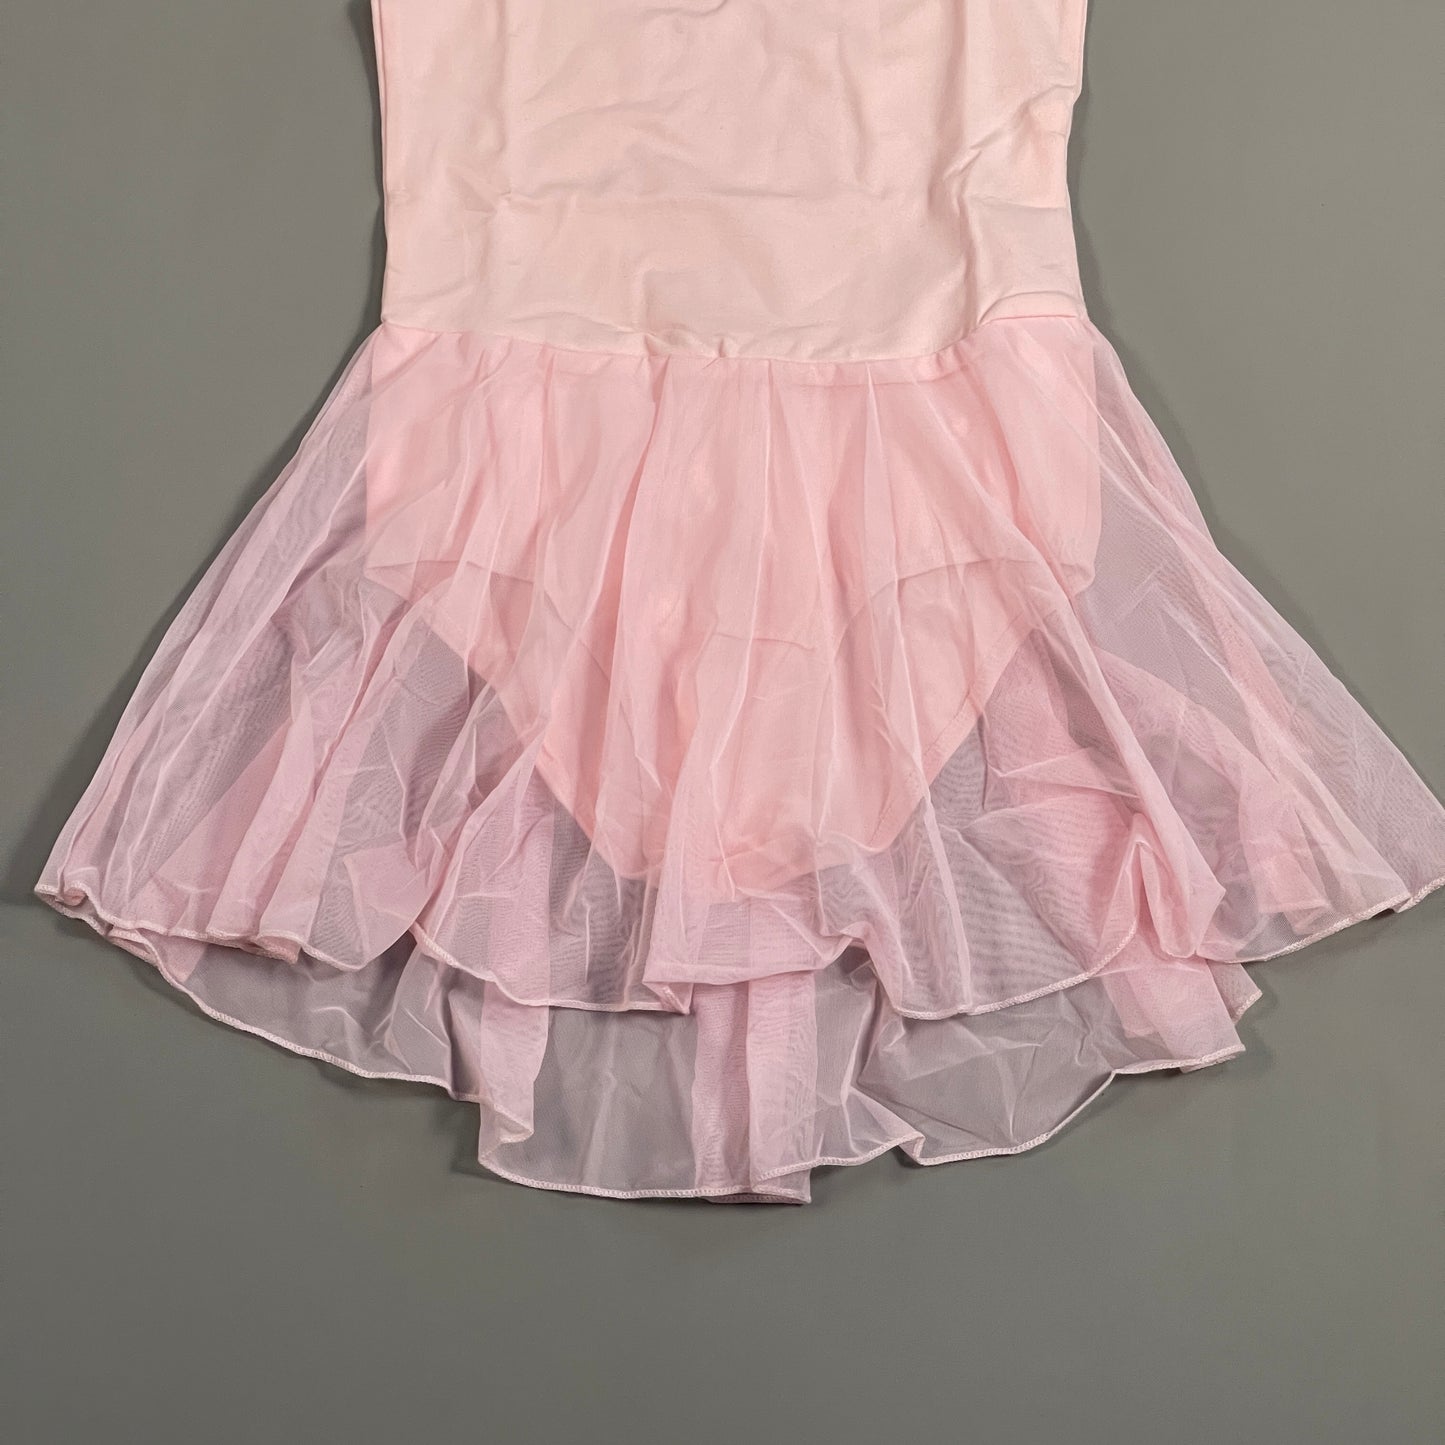 MDNMD Toddler Girls Ballet, Dance, Gymnastic, Leotard Flutter Sleeve Outfit With Skirt Sz 8 Pink (New)